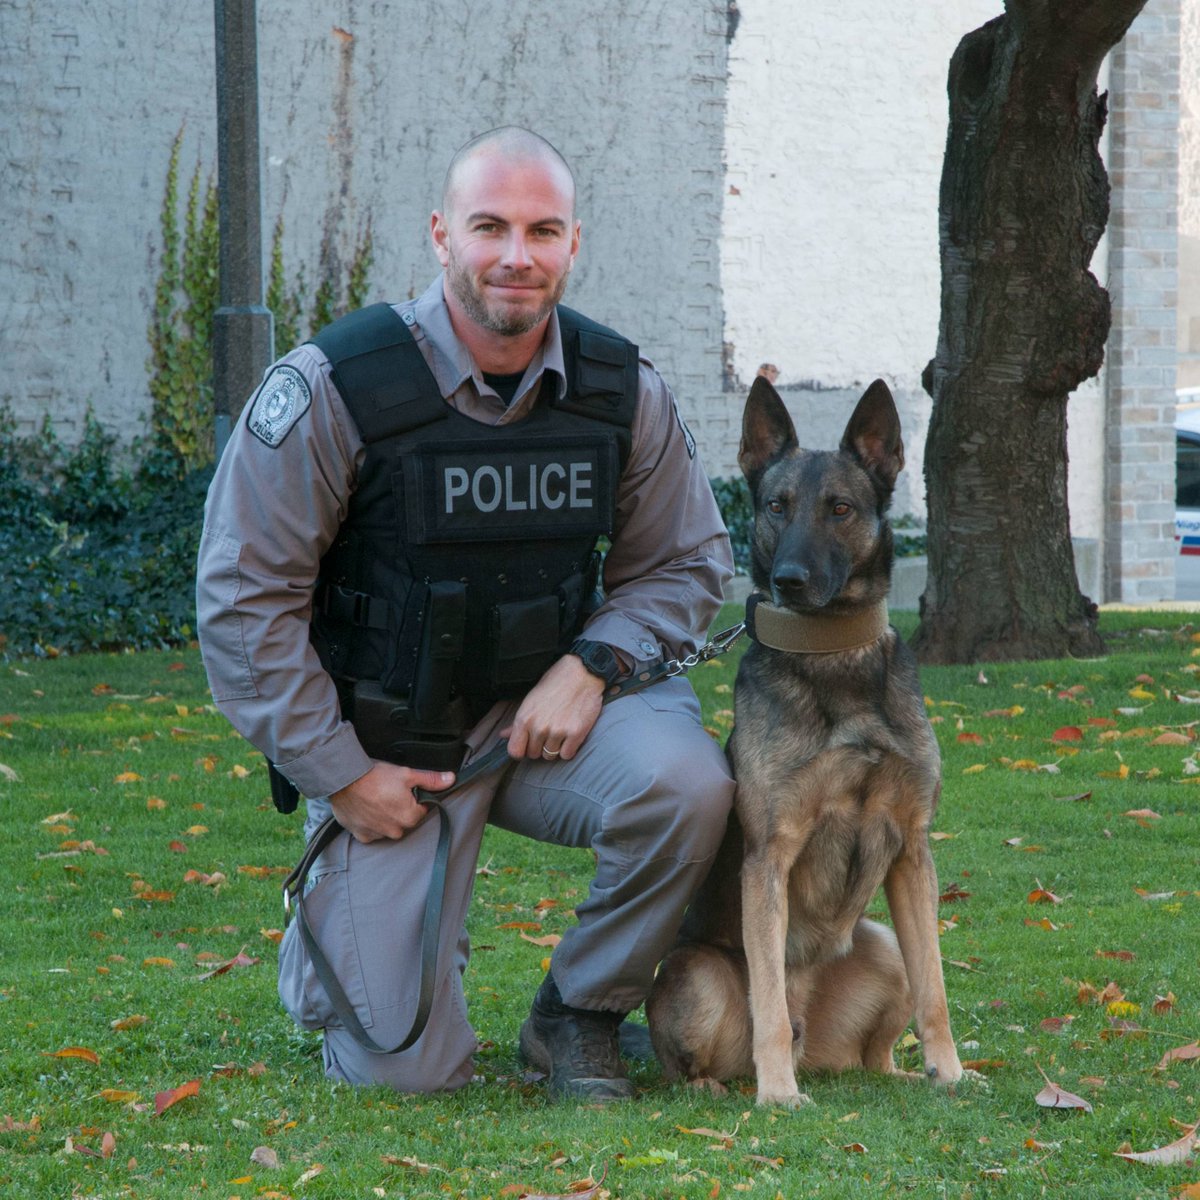 The NRPS sadly announces the passing of retired Police Service Dog Kona on May 8. With 160+ persons & pieces of evidence and $15,000 in illicit drugs recovered, Kona and his handler had a distinguished career, earning multiple commendations. Our thoughts are with Kona's family.